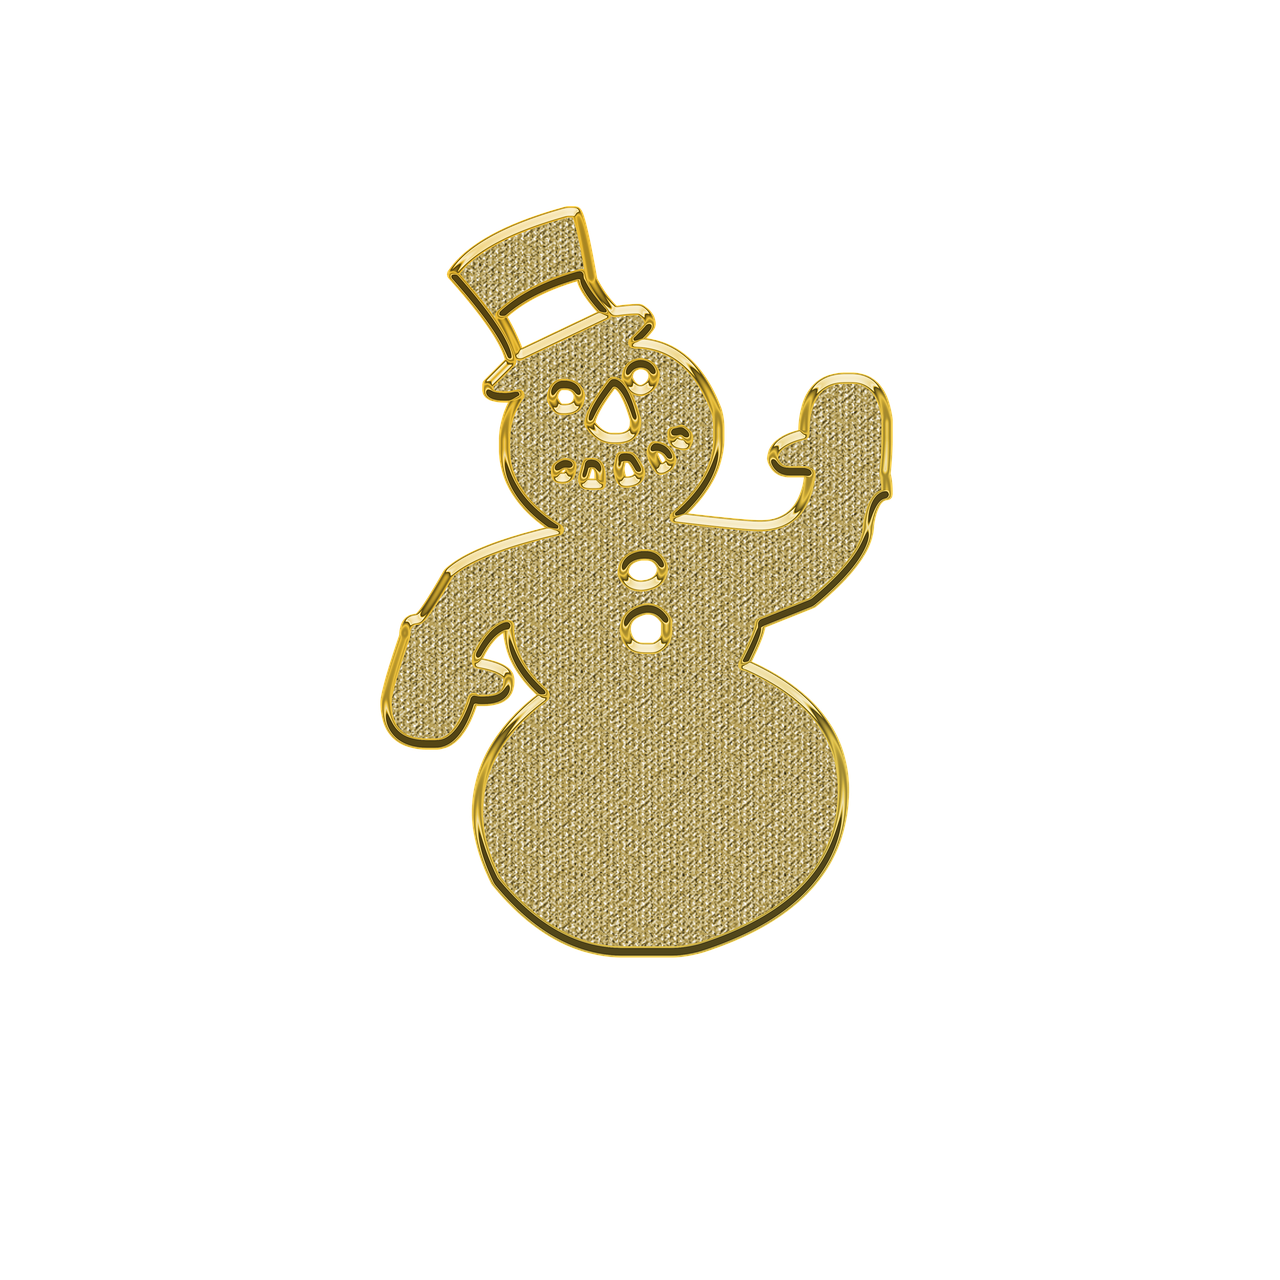 snowman new year's eve ornament free photo